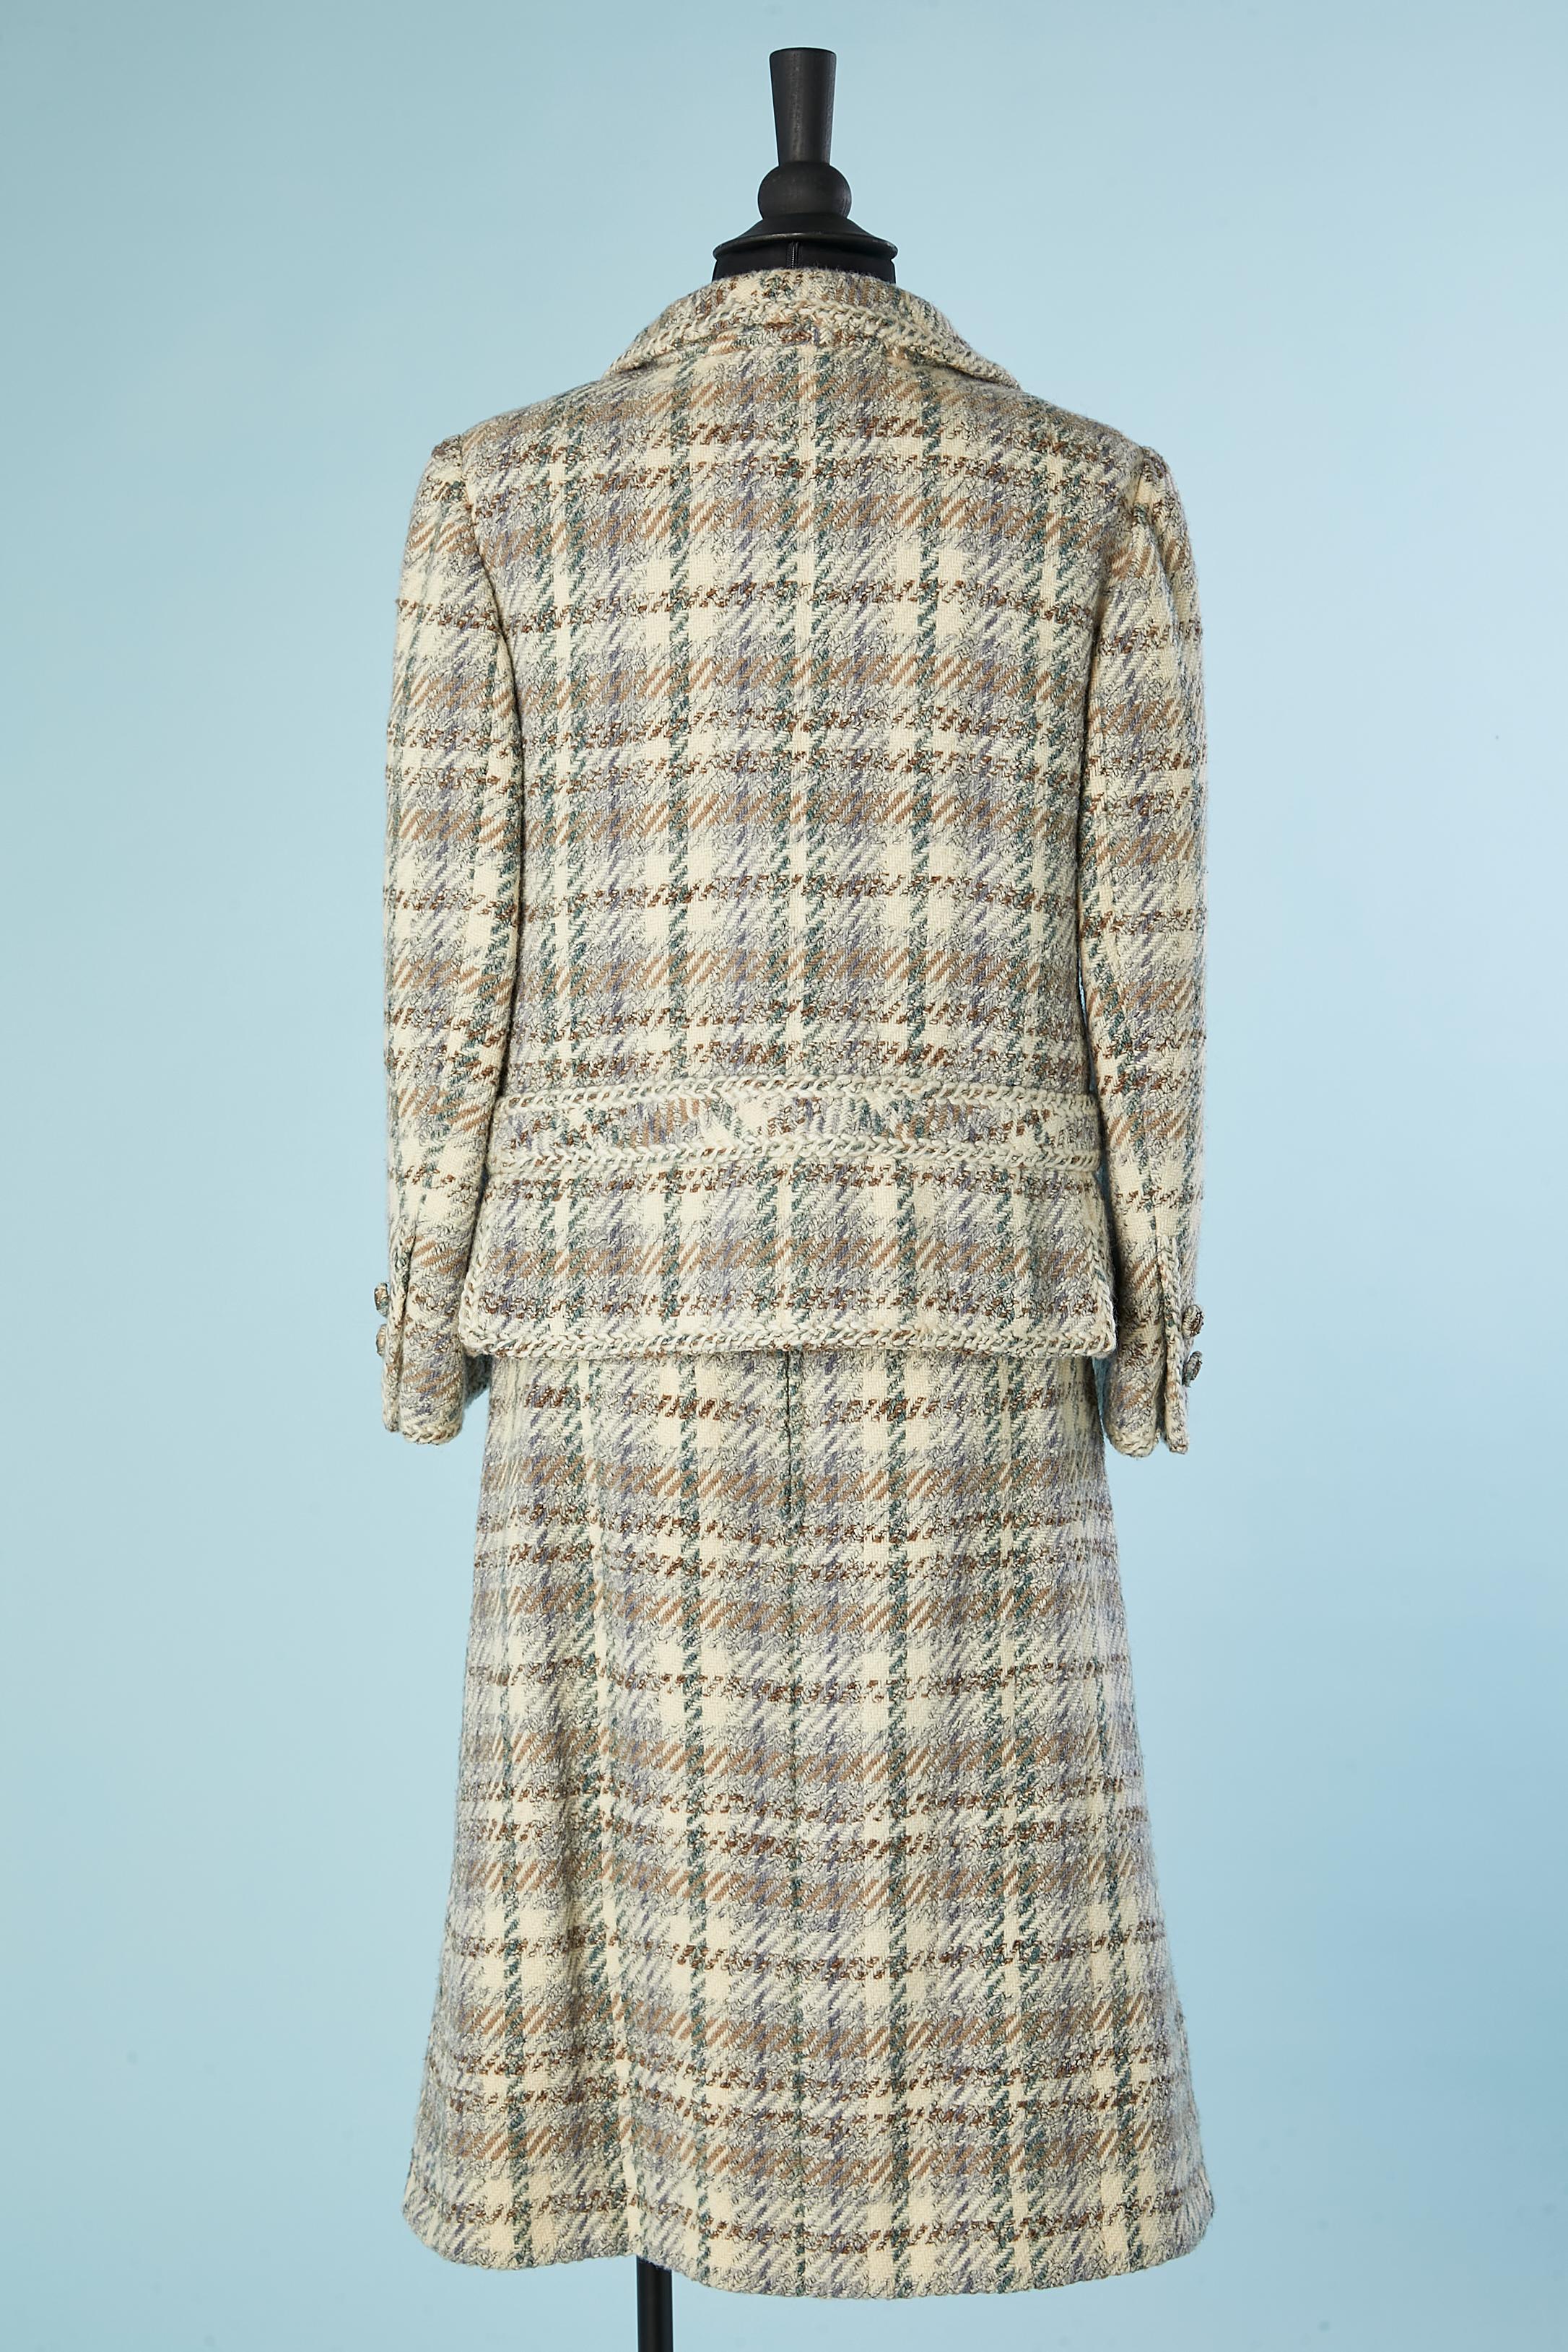 Grey, ivory and blue skirt-suit in tweed Chanel Haute-Couture Circa 1970's  For Sale 1